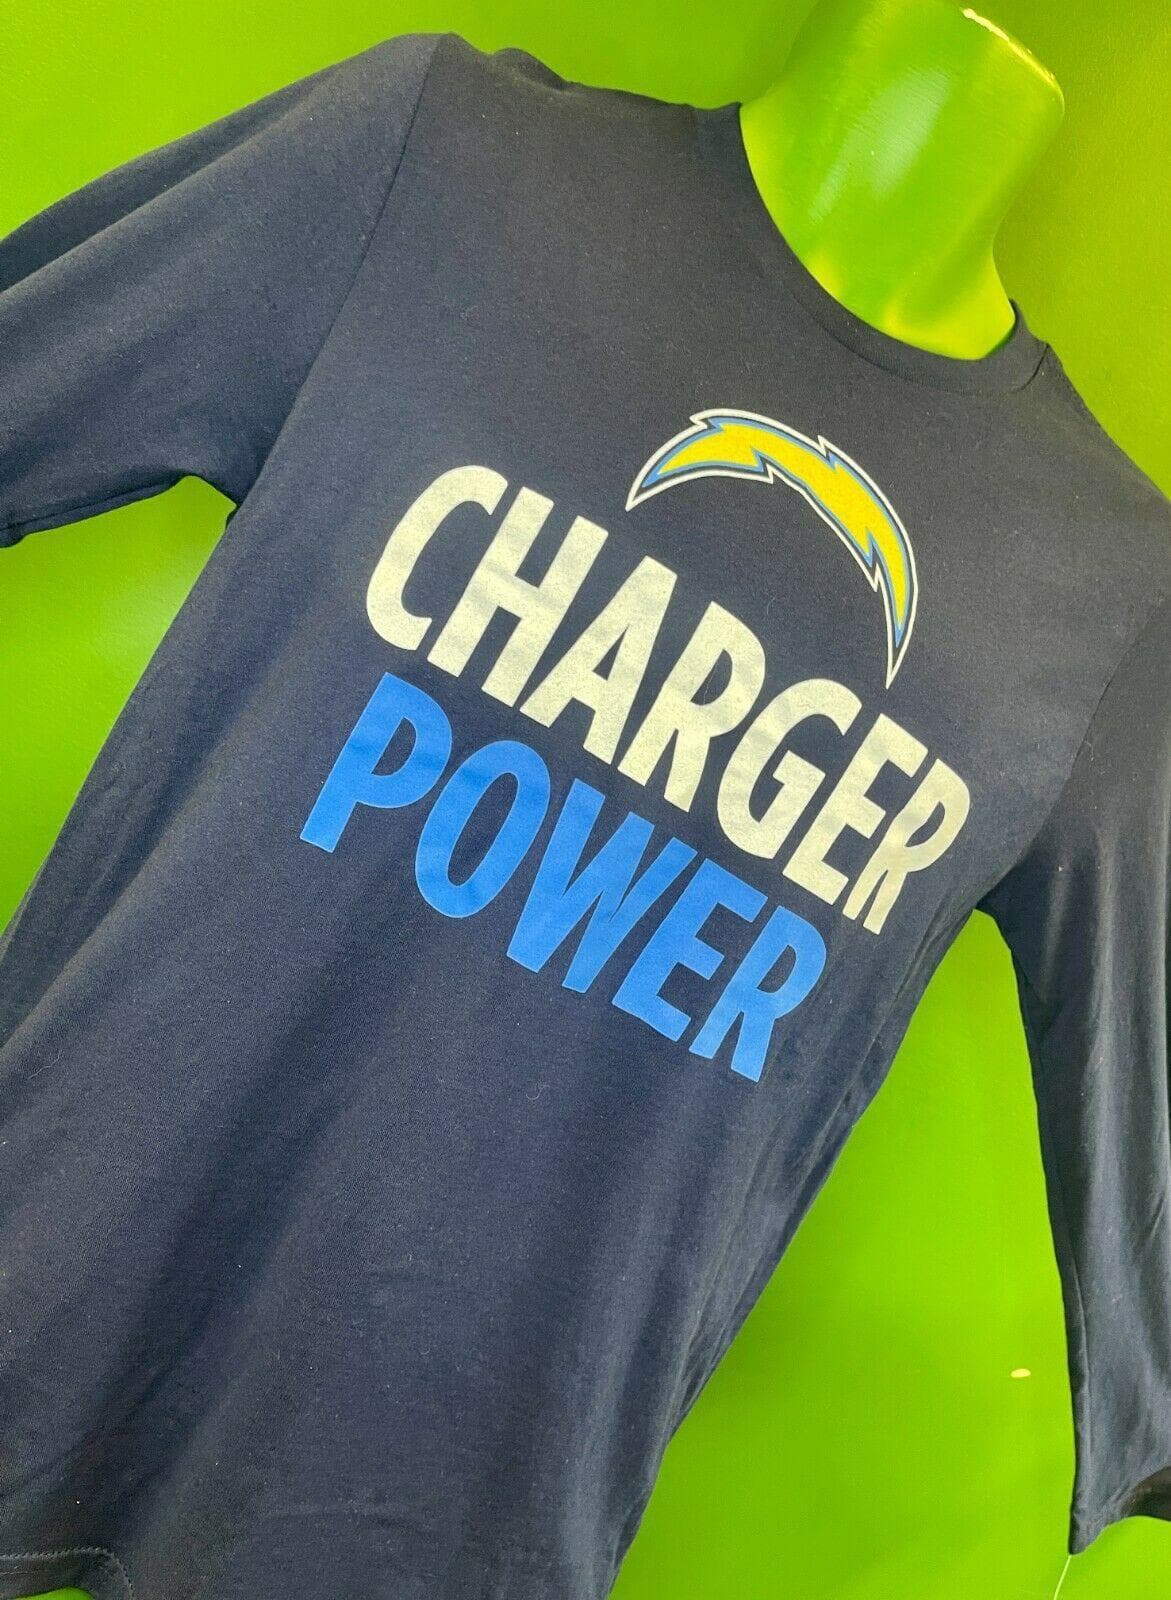 NFL Los Angeles Chargers "Charger Power" L-S T-Shirt Youth L 14-16 NWT